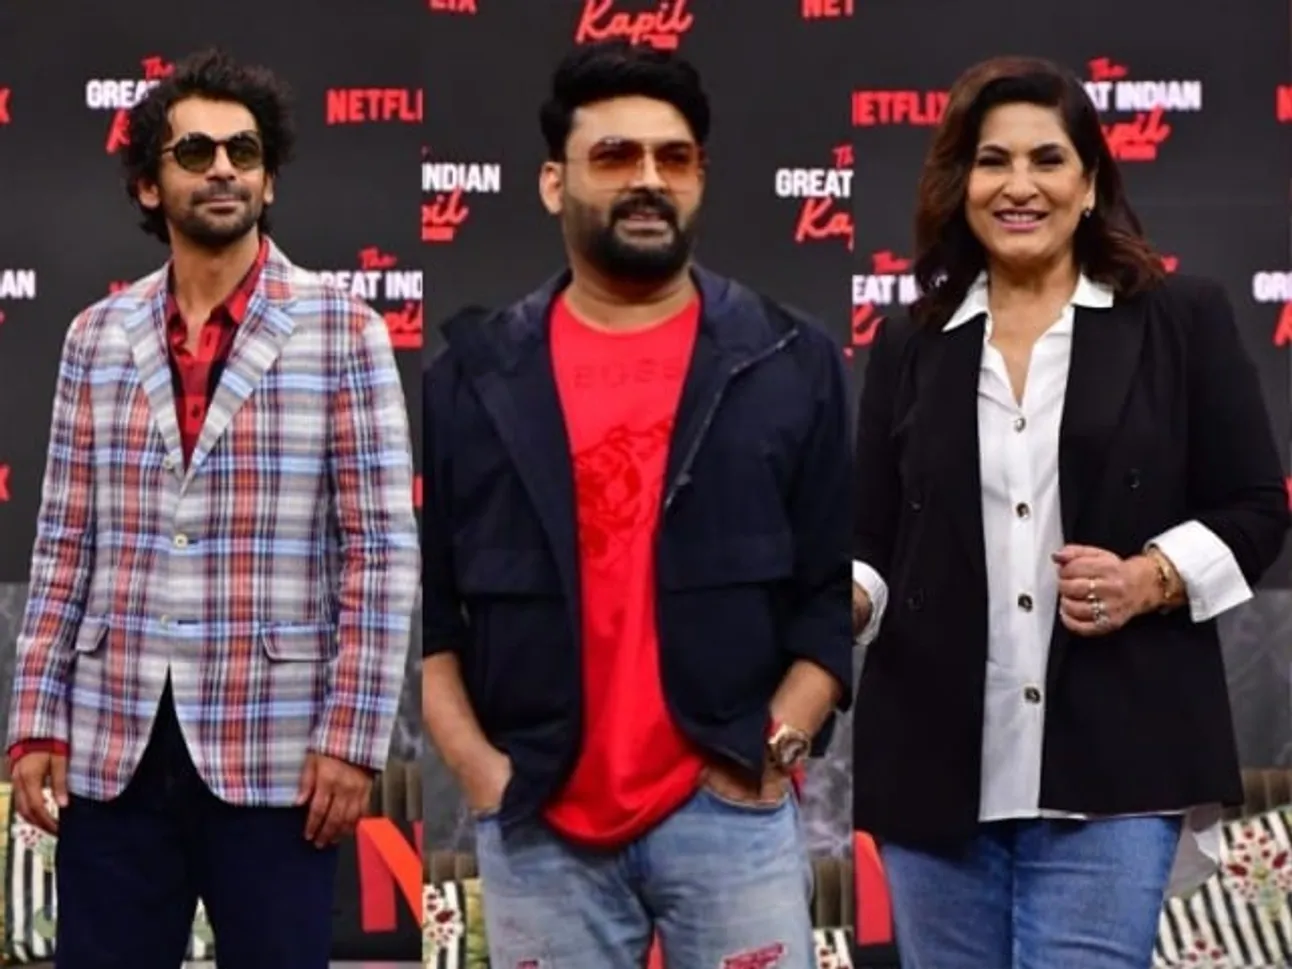 Kapil Sharma, Sunil Grover And Others' Fun-Filled Moments At Press Meet